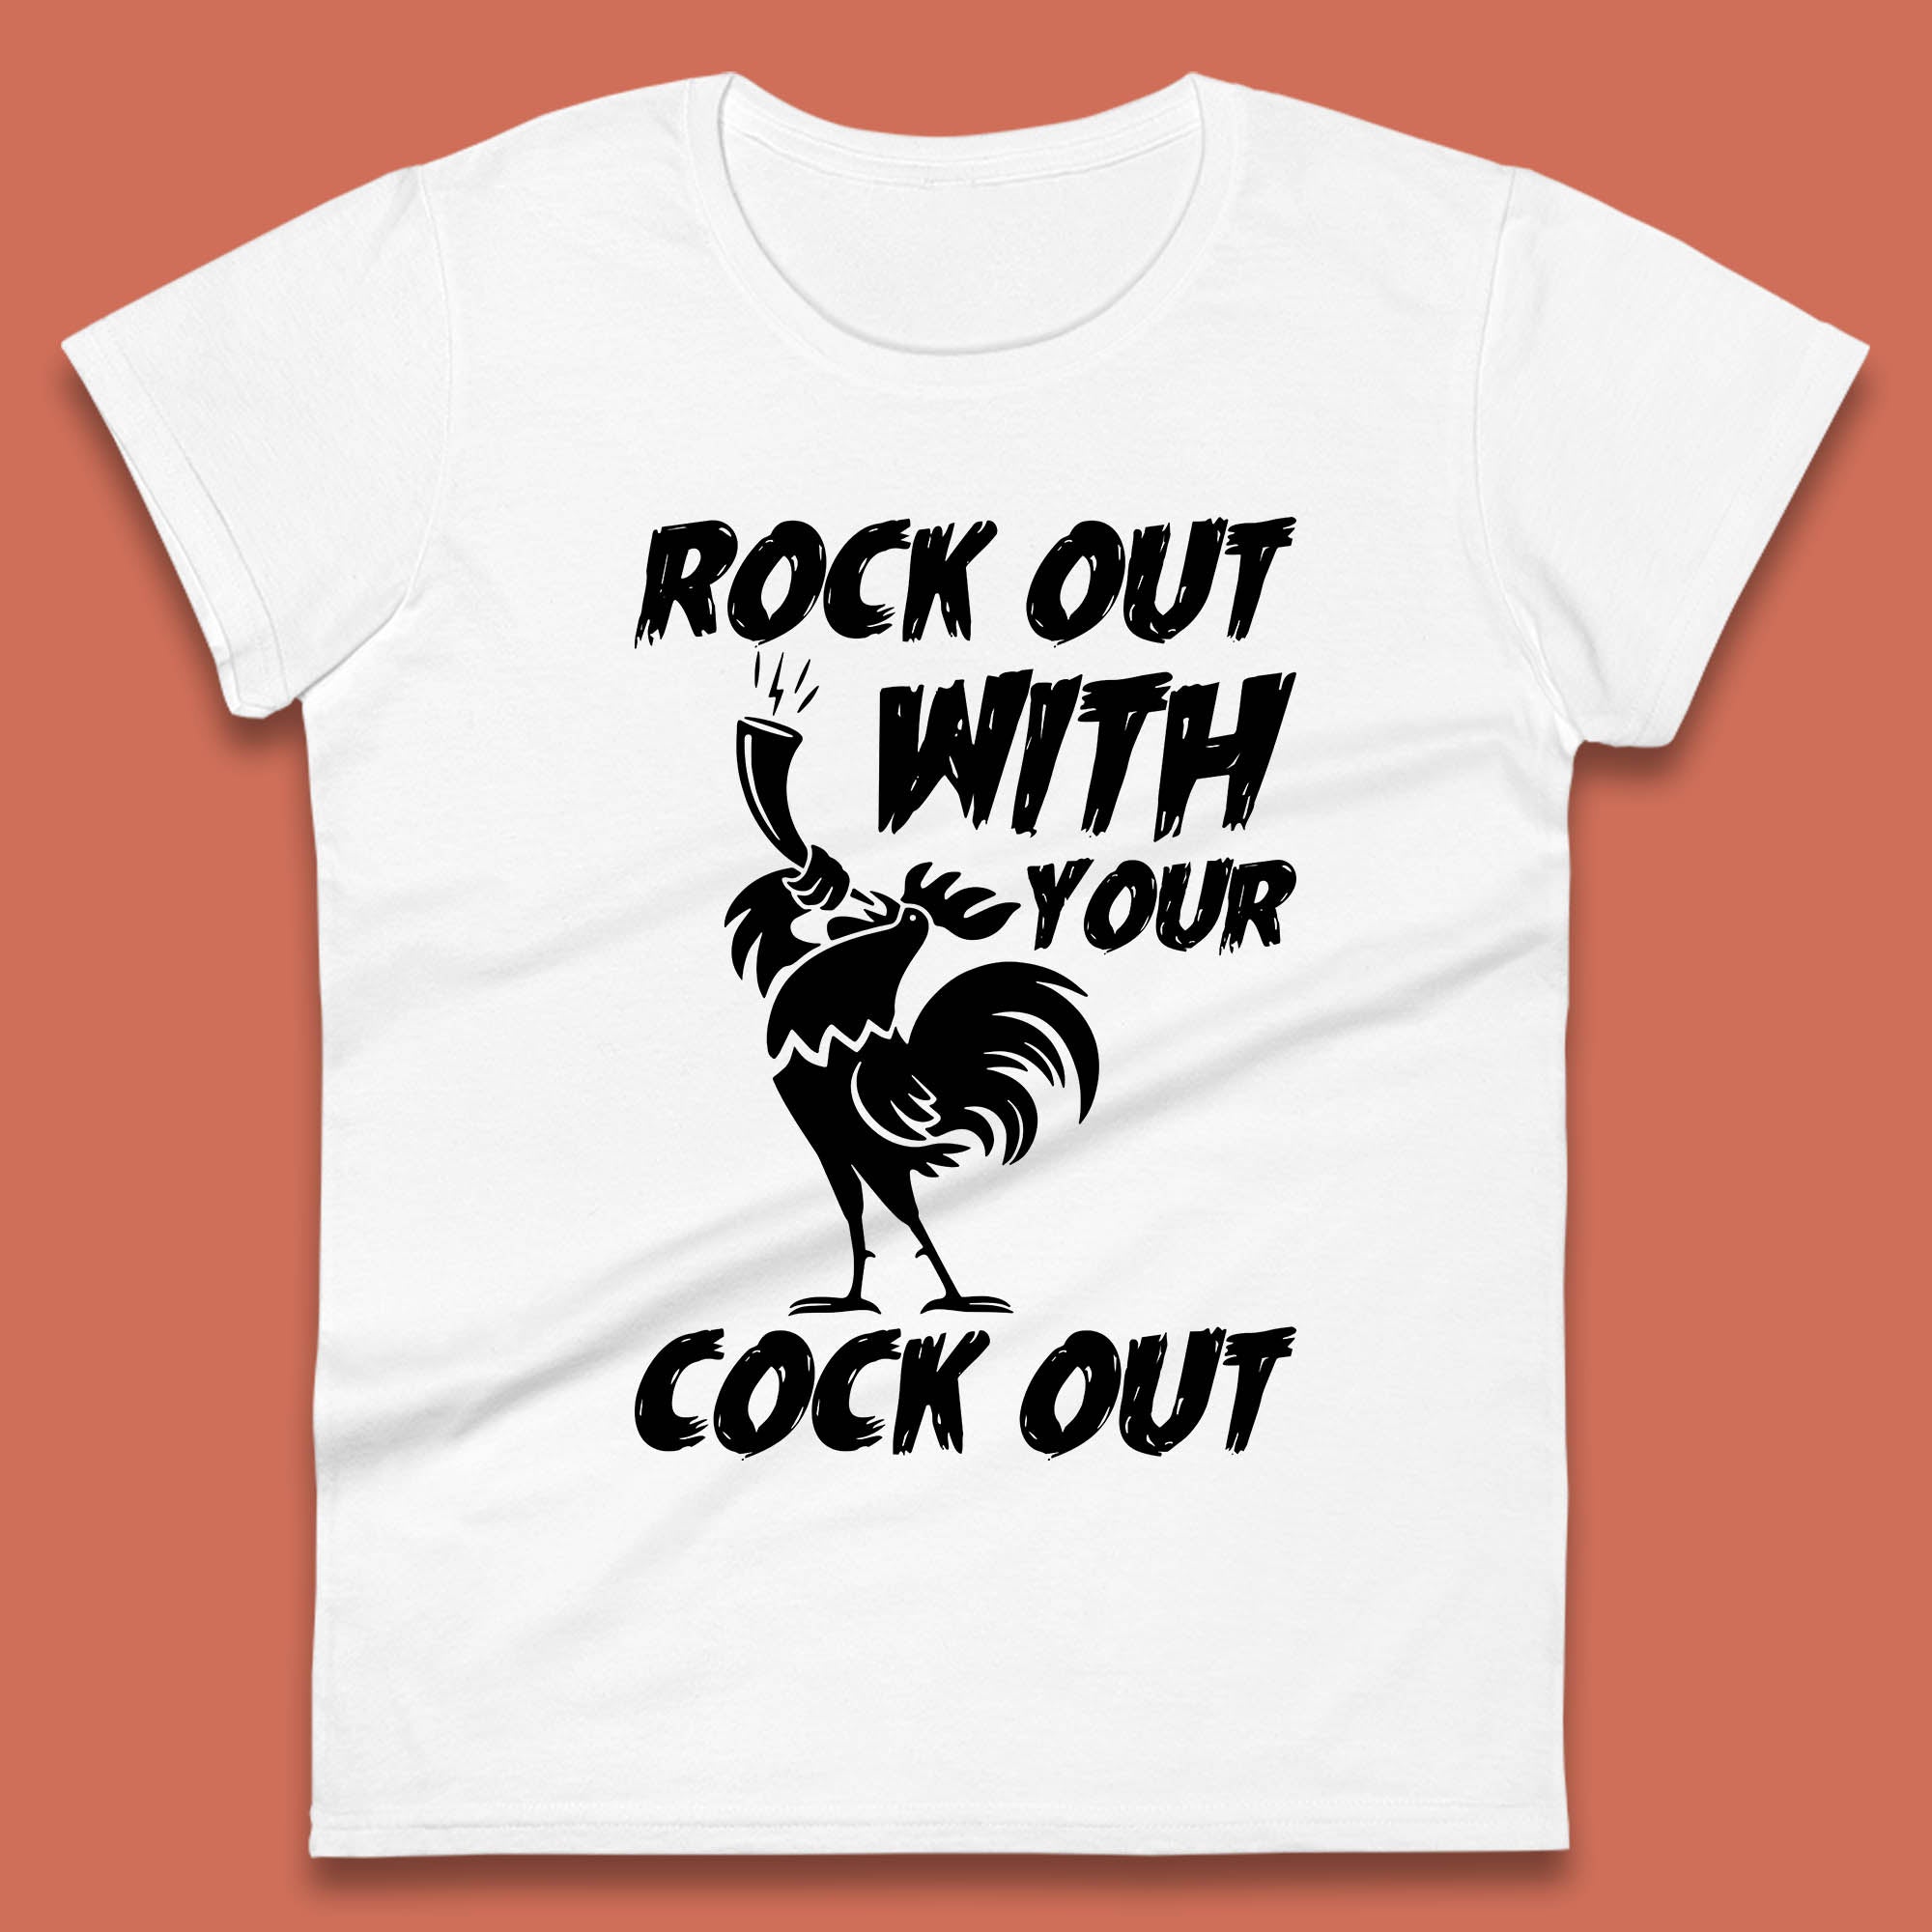 Rock Out With Your Cock Out Funny Offensive Cursed Offensive Meme Gag Joke Womens Tee Top